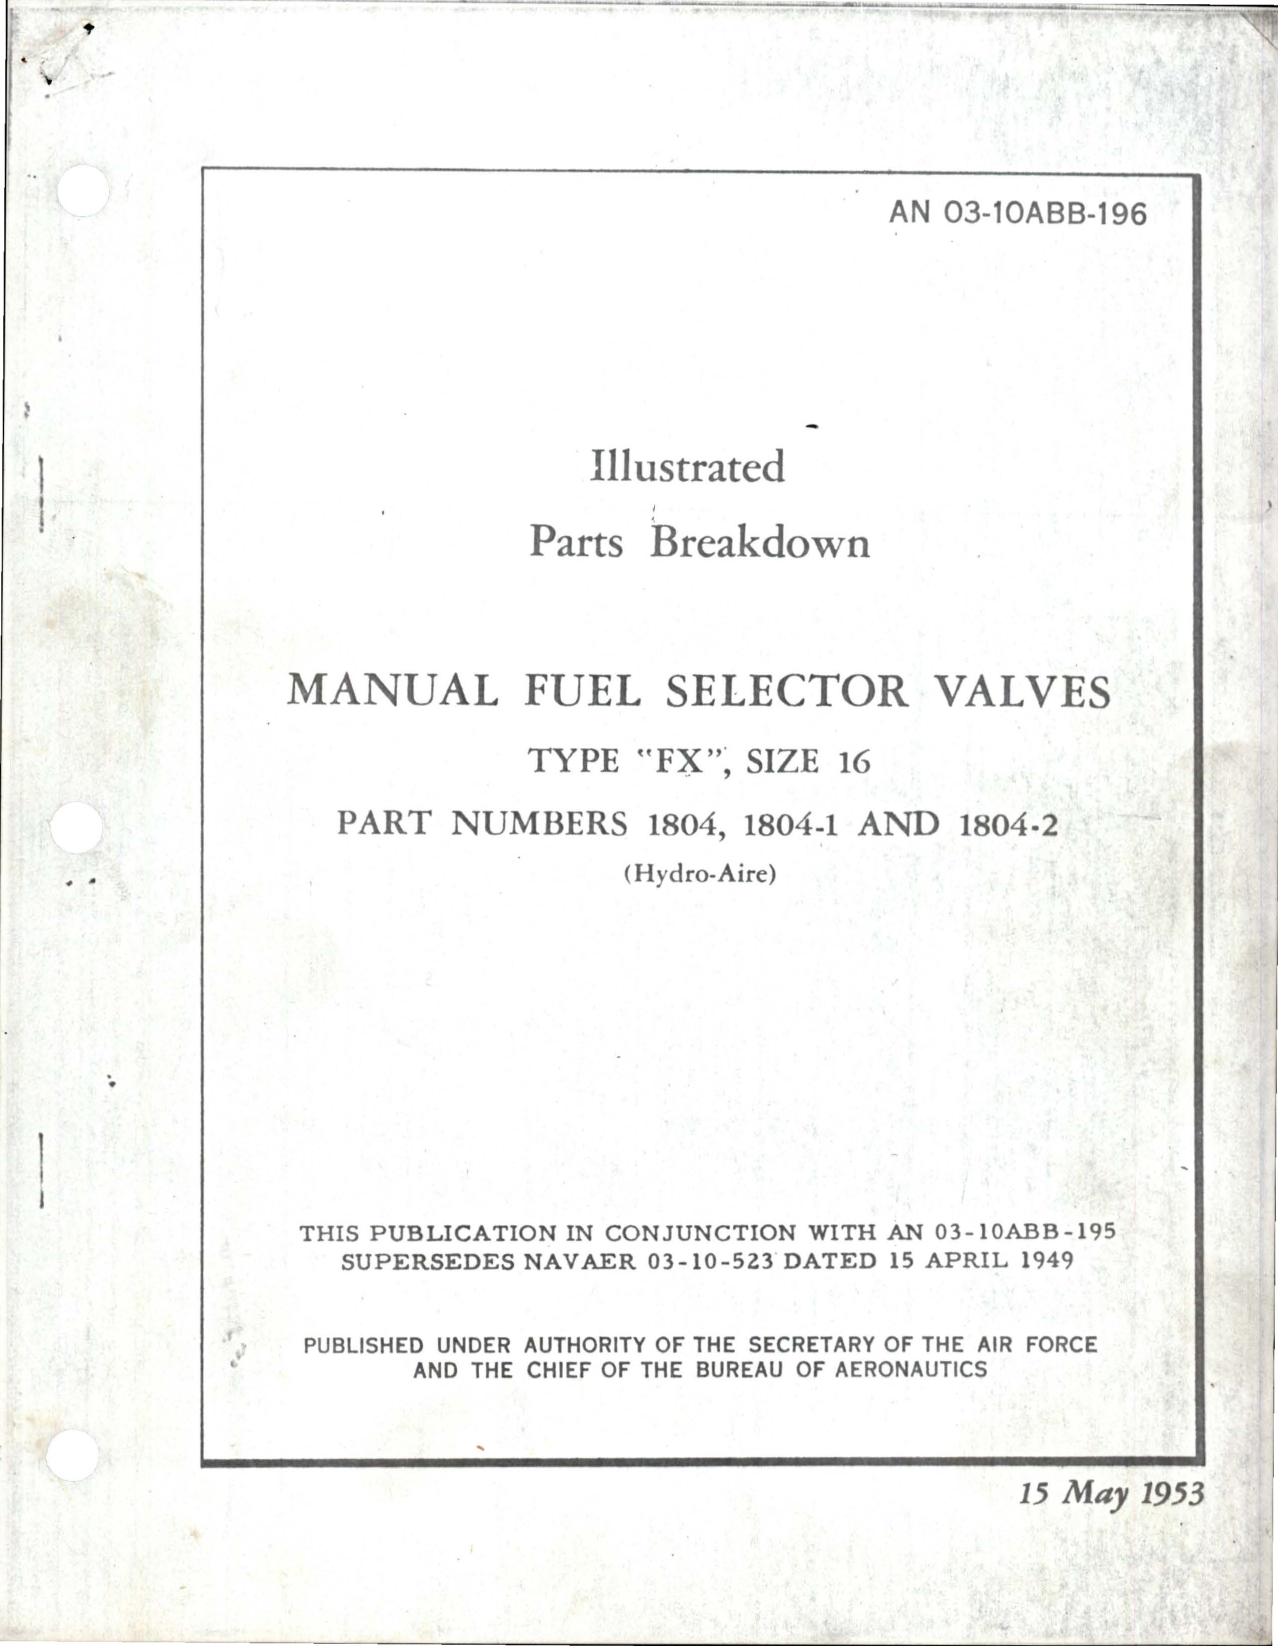 Sample page 1 from AirCorps Library document: Illustrated Parts Breakdown for Manual Fuel Selector Valves - Type FX - Size 16 - Parts 1804, 1804-1, and 1804-2